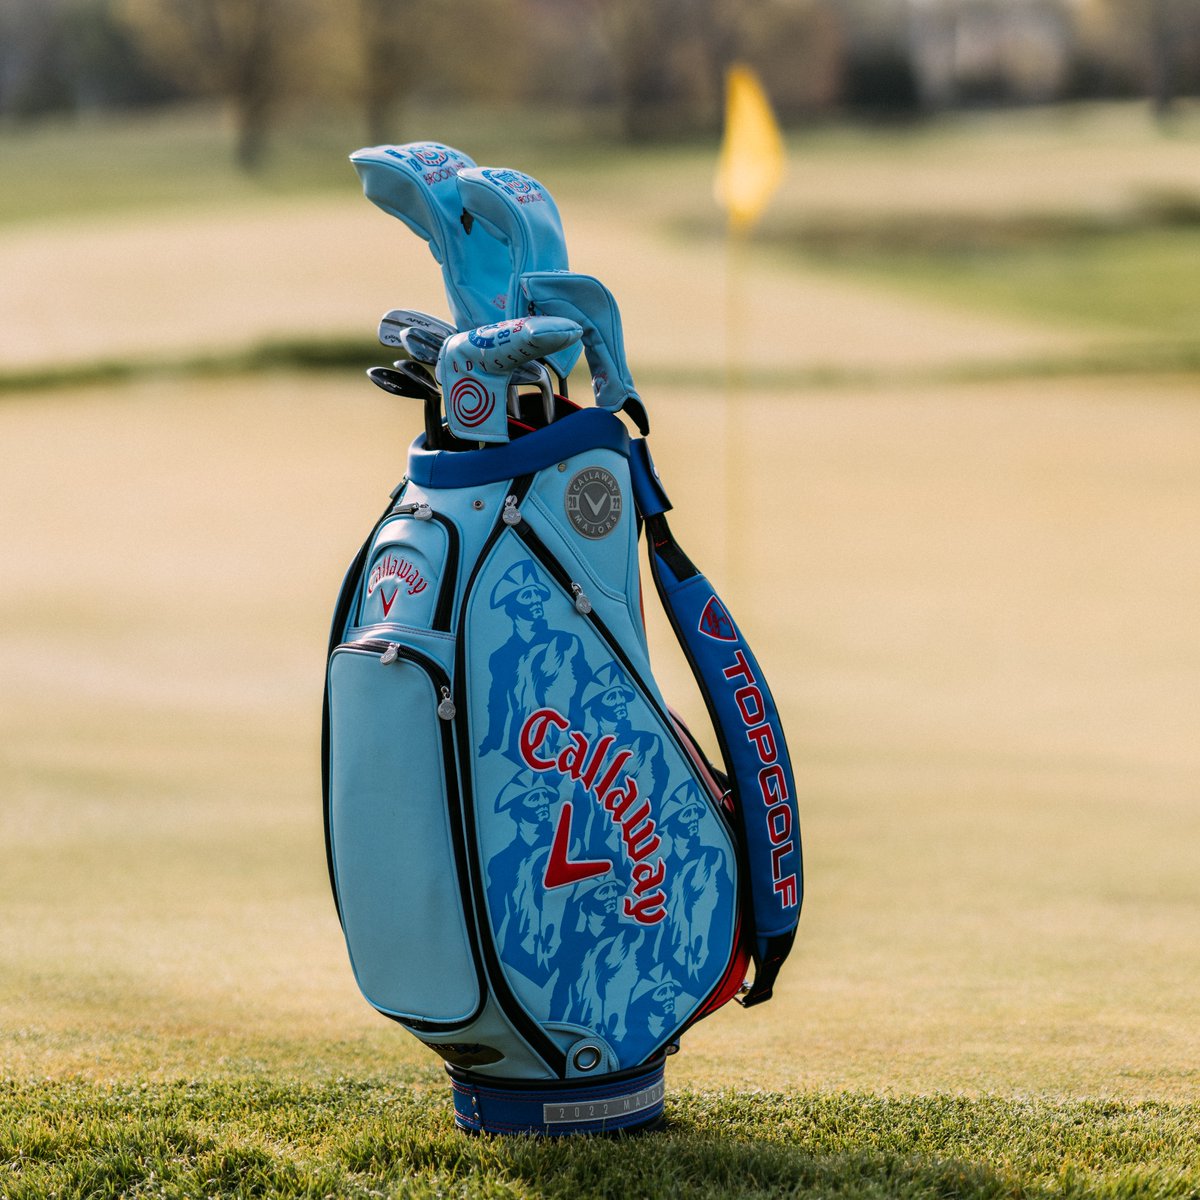 🚨 SWEEPSTAKE! 🚨‍ Post-Major blues?! ☹️ Don't worry - we've got you covered! Here's your chance to win the June Major Staff Bag, as used by #TeamCallaway in Brookline last week!🇺🇸🏌️‍♂️ To ENTER, simply: 🔄 RETWEET this post 👉 FOLLOW @CallawayGolfEU Good luck! 🤞